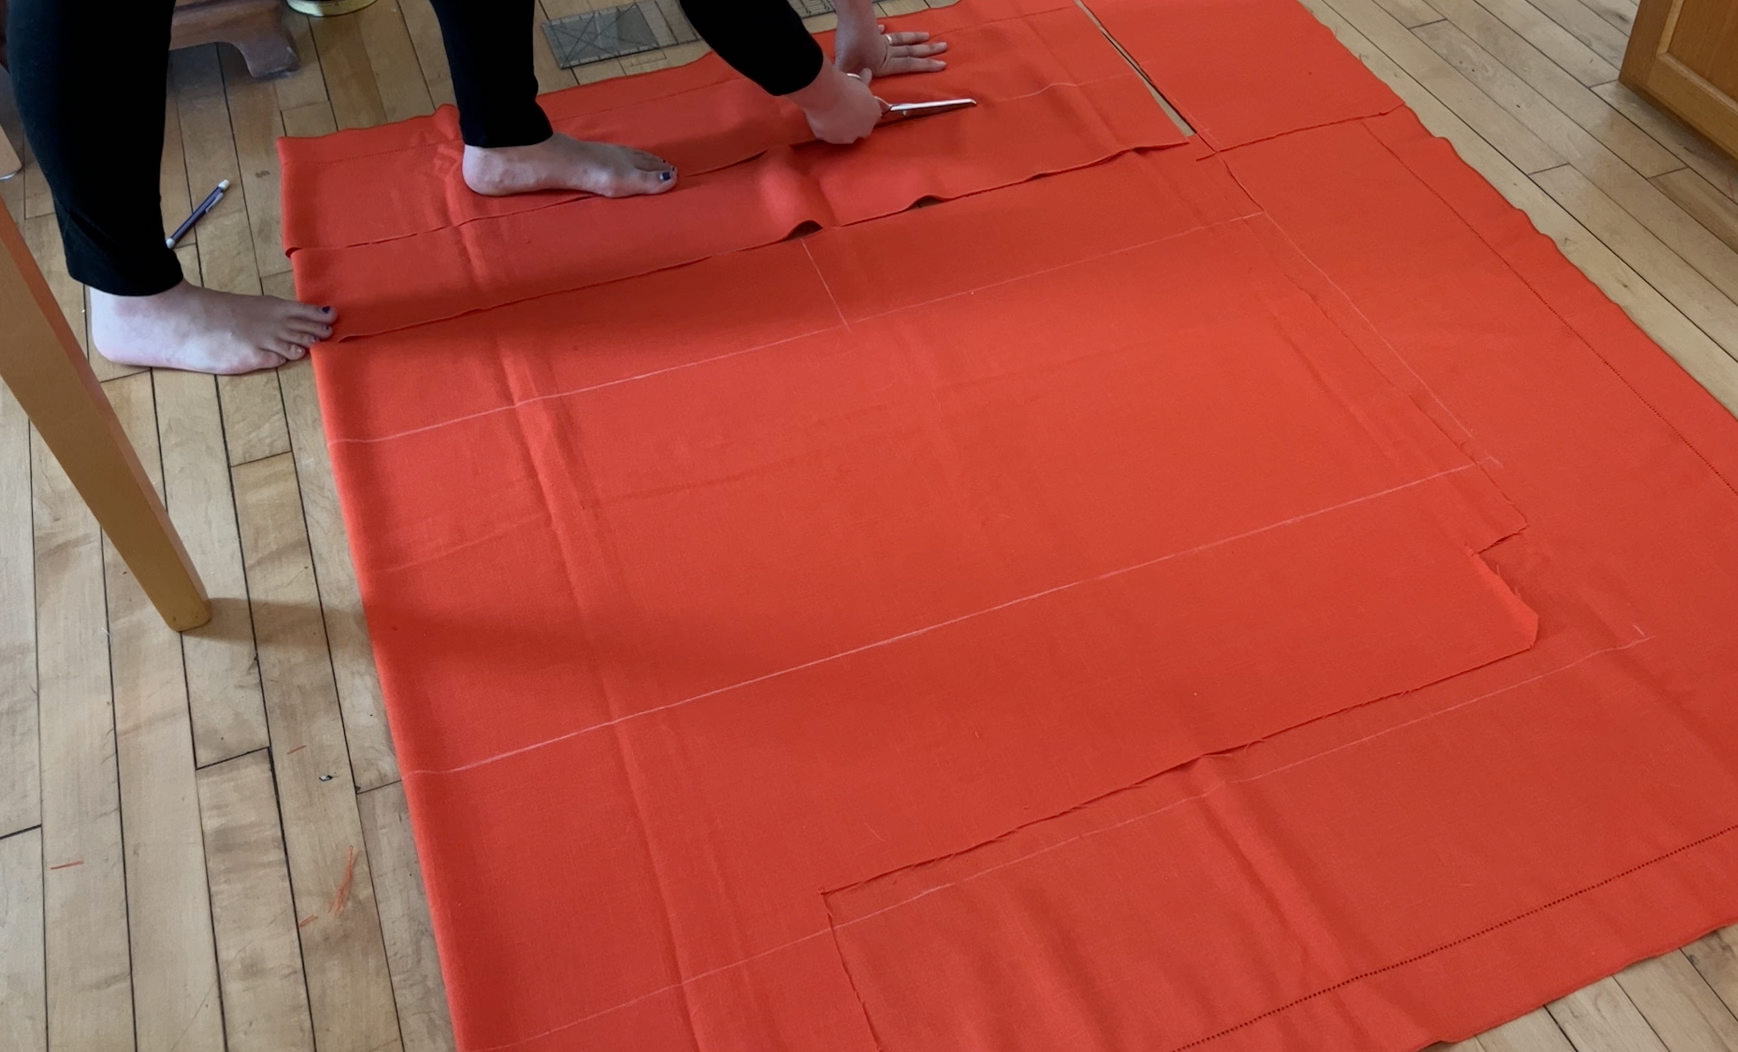 Cutting the fabric for the skirt